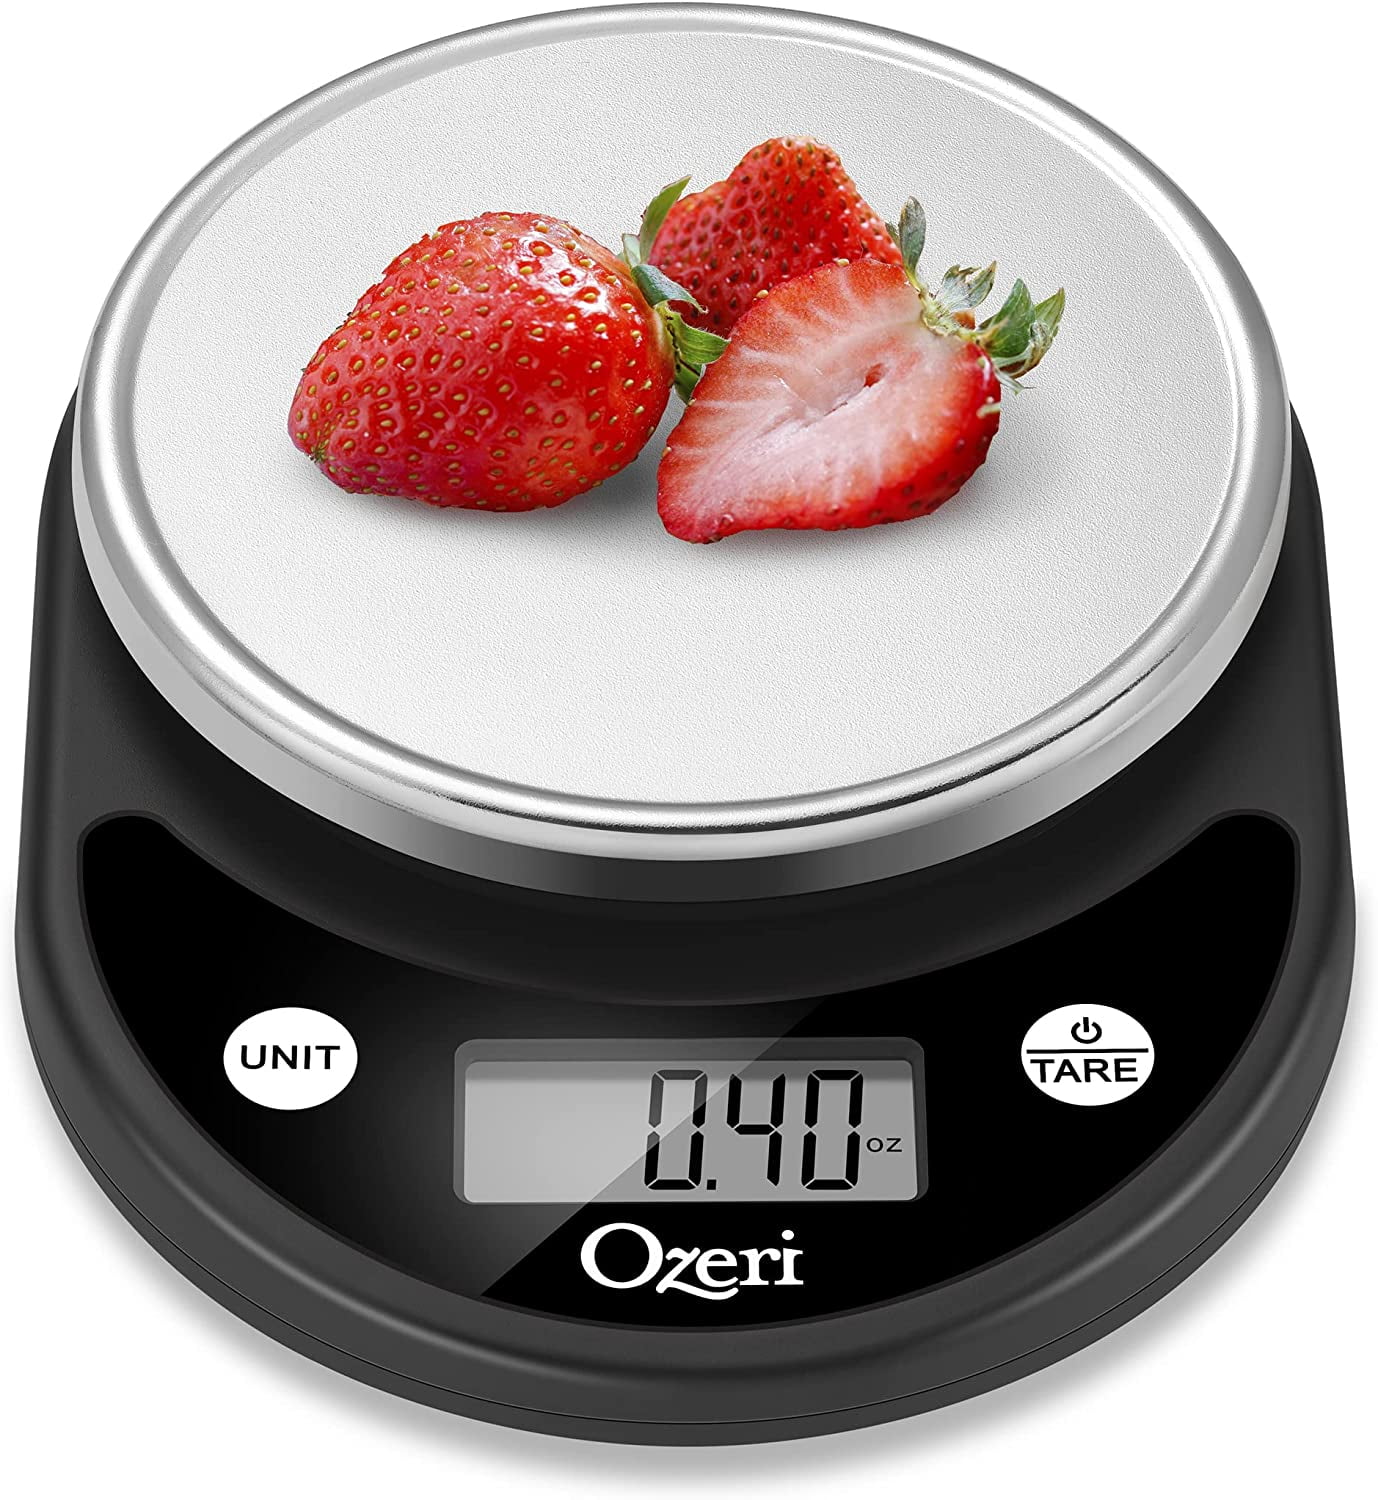  Online Auctions - Save Huge - Ship or Pick Up - NEW Tomiba  EK6011 Digital Kitchen Food Scale for Baking, 5kg/11lbs, White